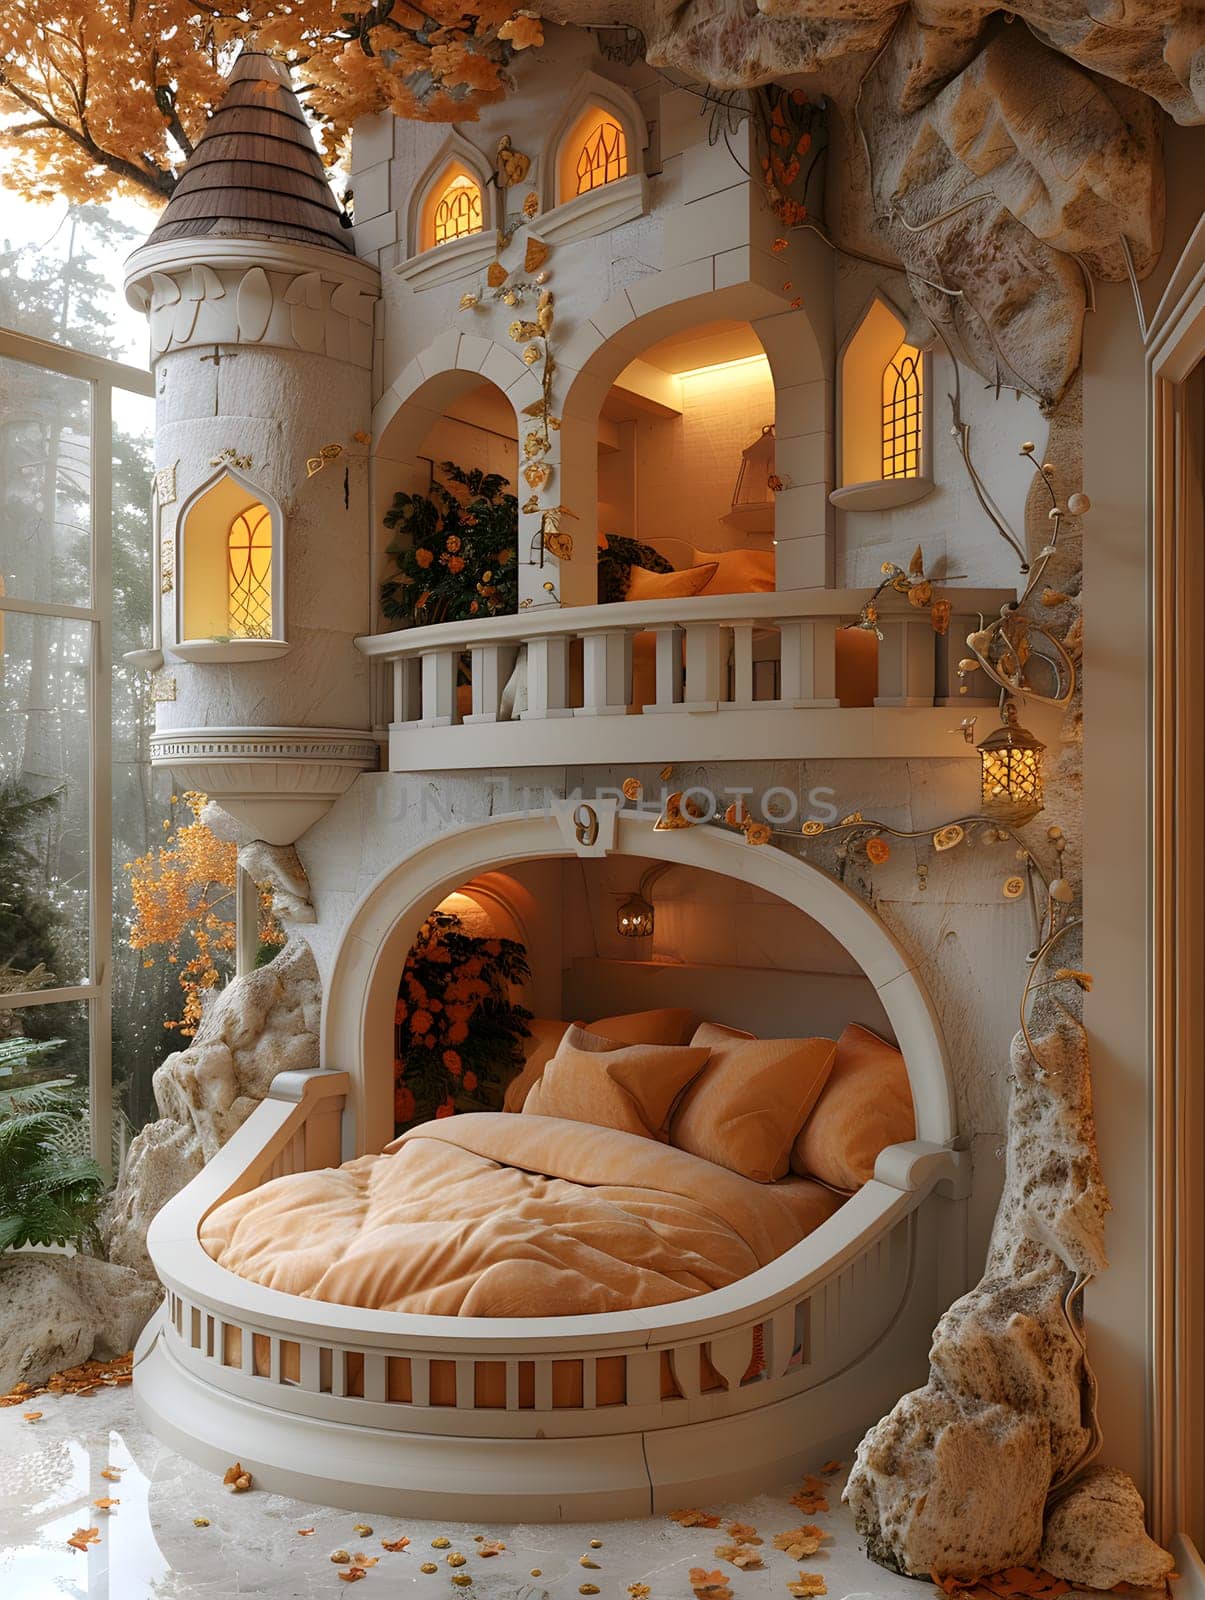 Interior design with a castlethemed bed, adorned with Byzantine architecture. The room features plants, art, and fixtures for added comfort and aesthetics